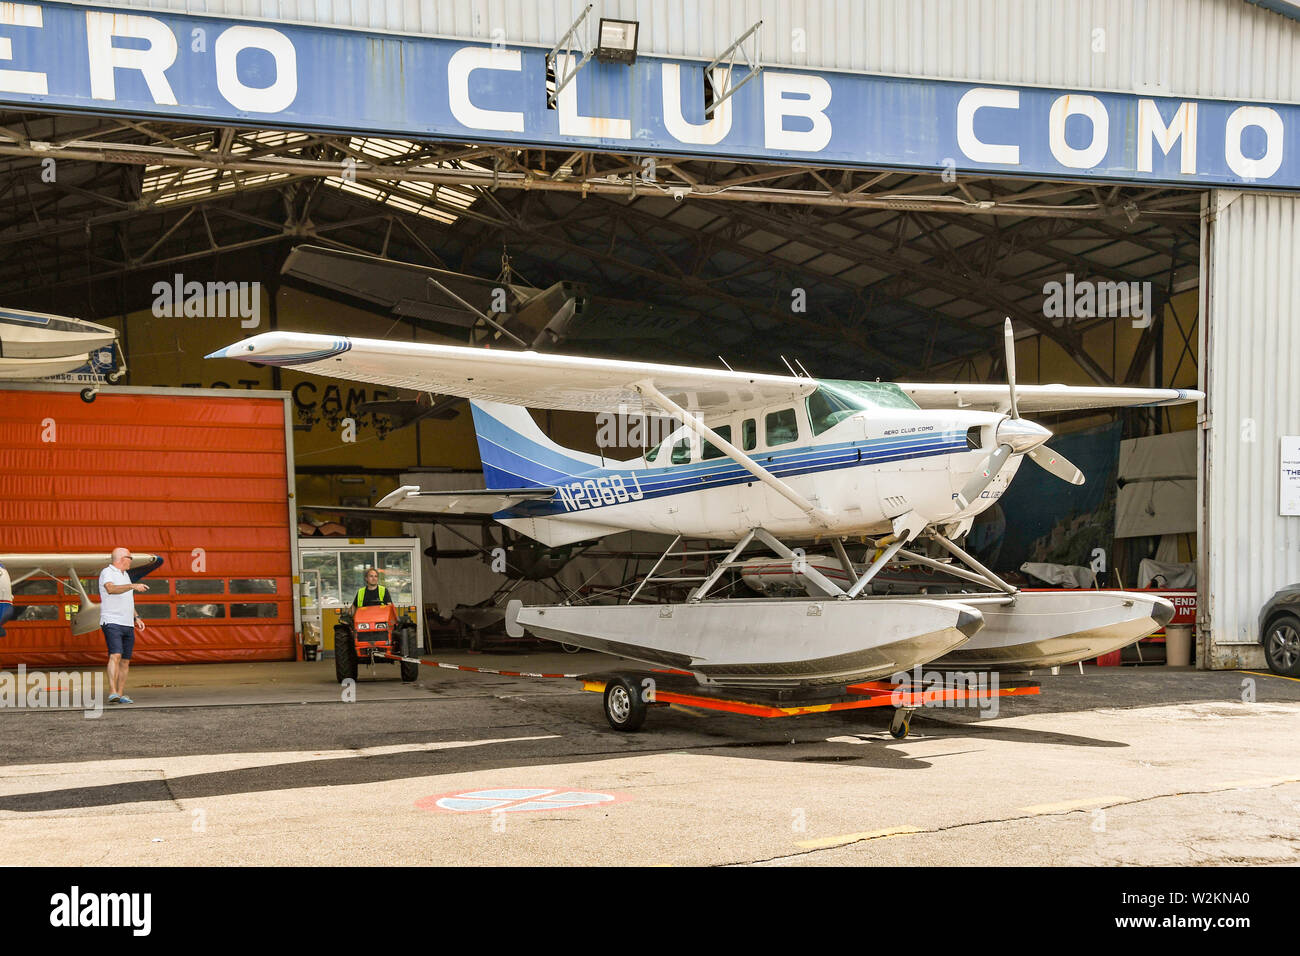 COMO, LAKE COMO, ITALY - JUNE 2019: Floatplane operated by the Aero Club Como being pushed from the hangar in the town of Como on Lake Como. Stock Photo